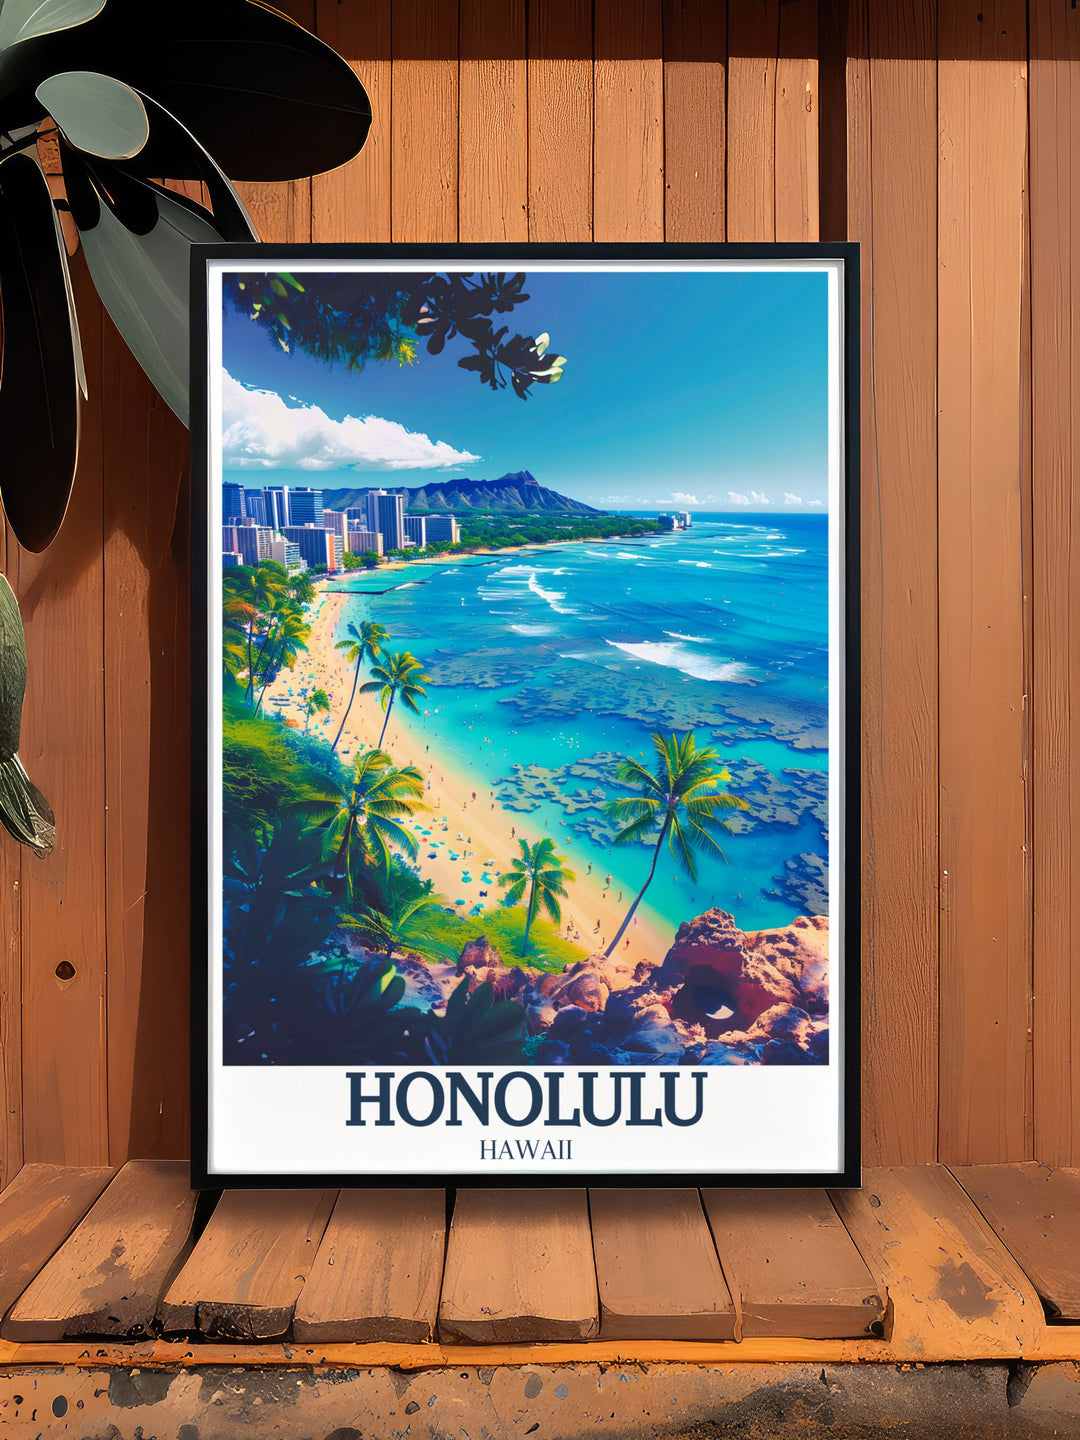 Travel poster featuring the lively Waikiki Beach in Honolulu, Hawaii, illustrating its vibrant atmosphere, palm trees, and beachfront activities. This detailed print is perfect for anyone who loves the energy and beauty of tropical destinations.